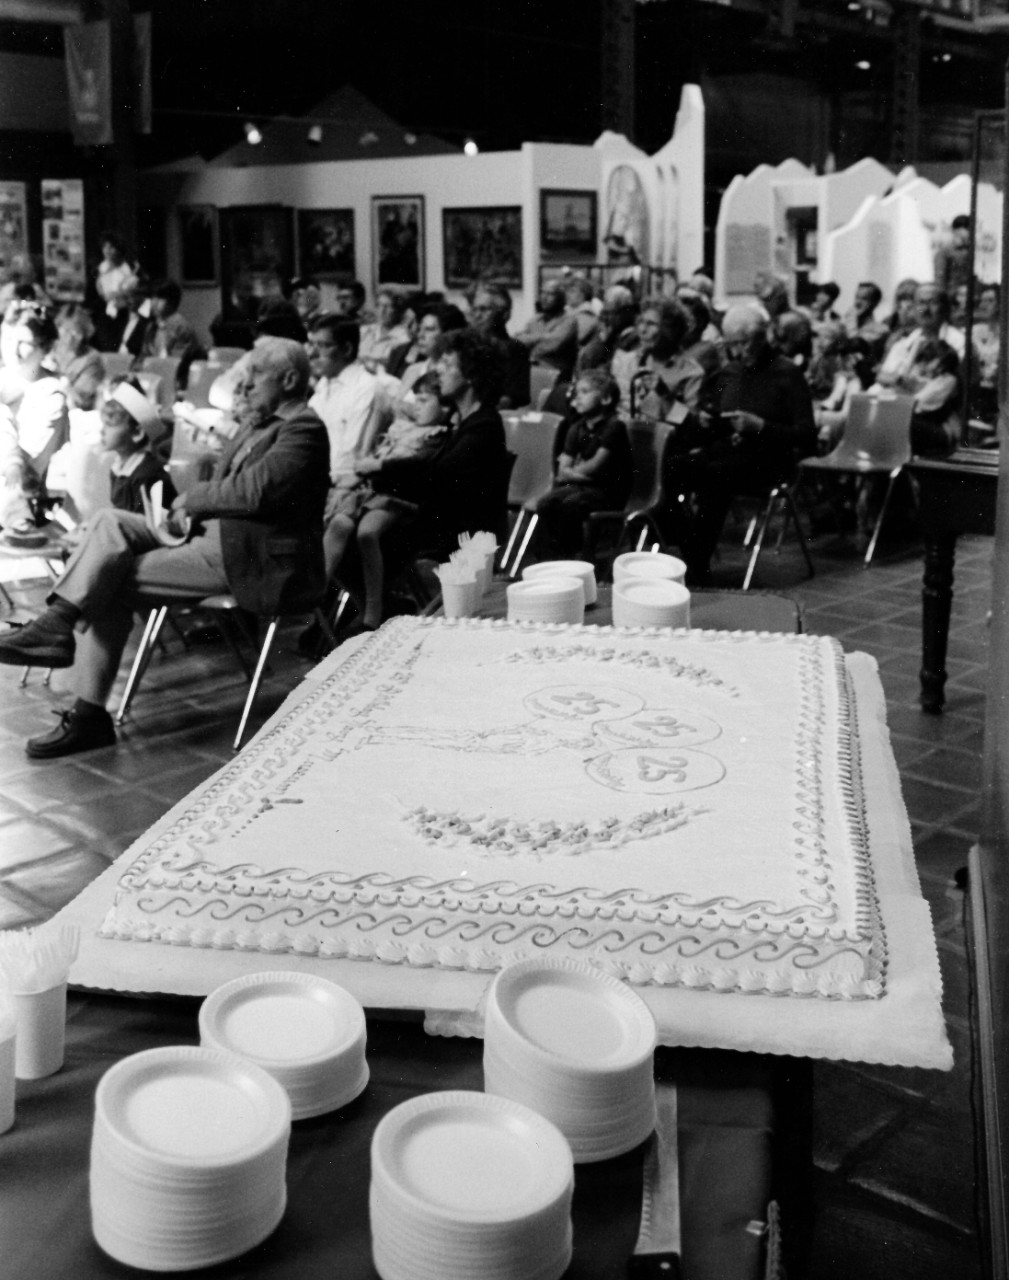 NMUSN-40: Cake for the 25th Anniversary of the Navy Museum, October 1987. Visitors listen to remarks at the Navy Museum, Washington Navy Yard, Washington, D.C. National Museum of the U.S. Navy Photograph Collection.